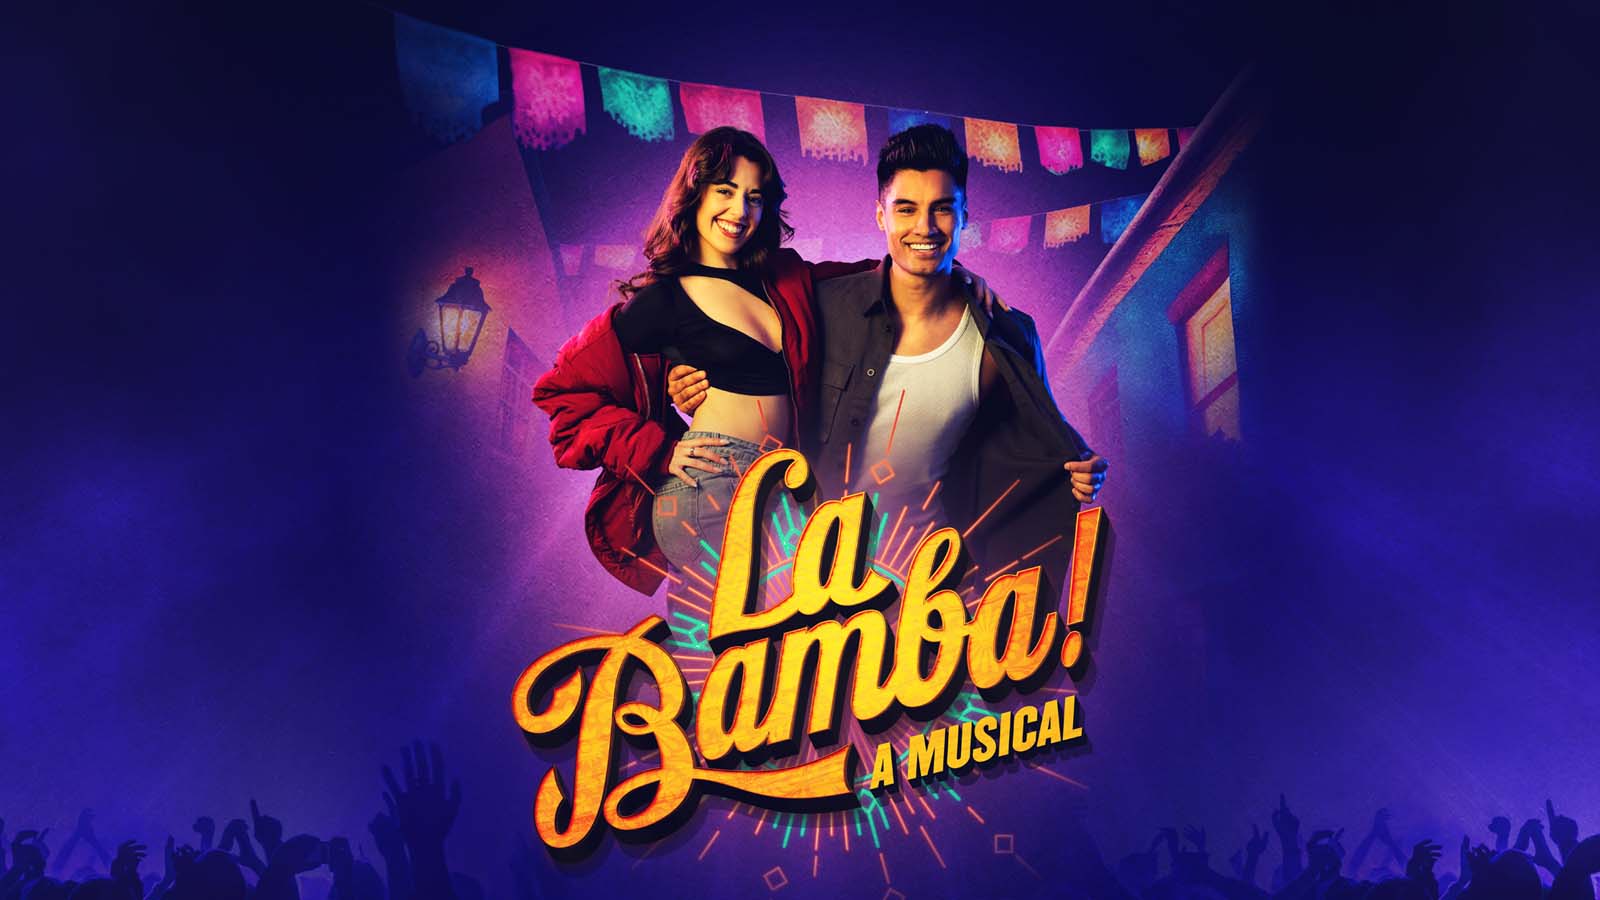 La Bamba! is a jaw-dropping new musical that combines Latin, R&B, and timeless rock and pop to tell the ultimate feel-good story of a young girl with a big voice, big dreams, and an even bigger heart.